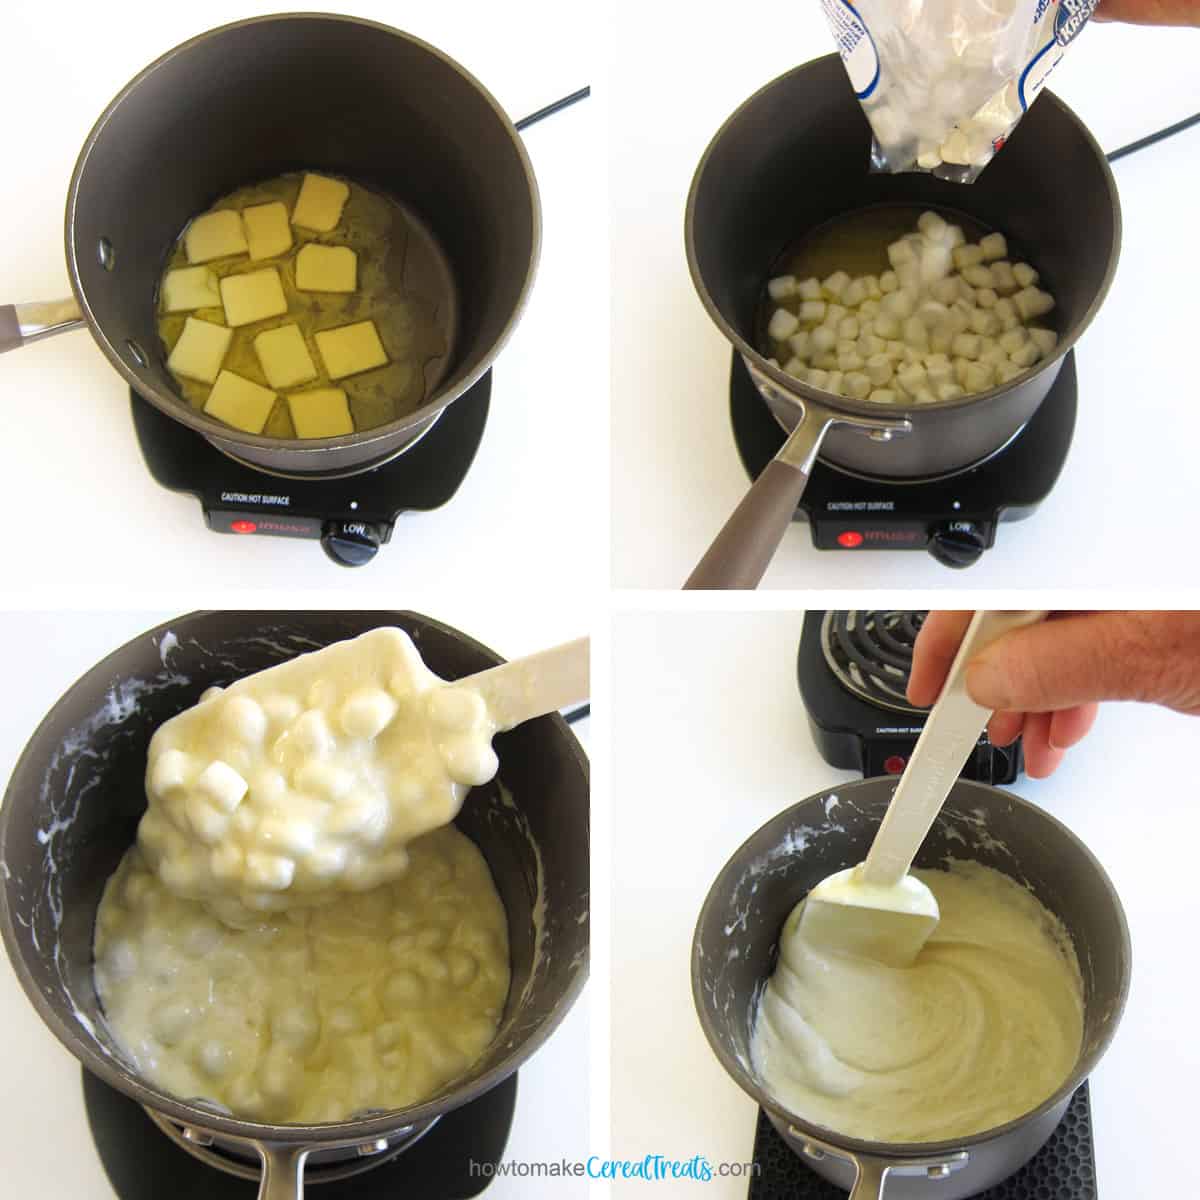 melt butter, add marshmallows, heat over low until 75% melted, then remove from heat and stir until melted. 